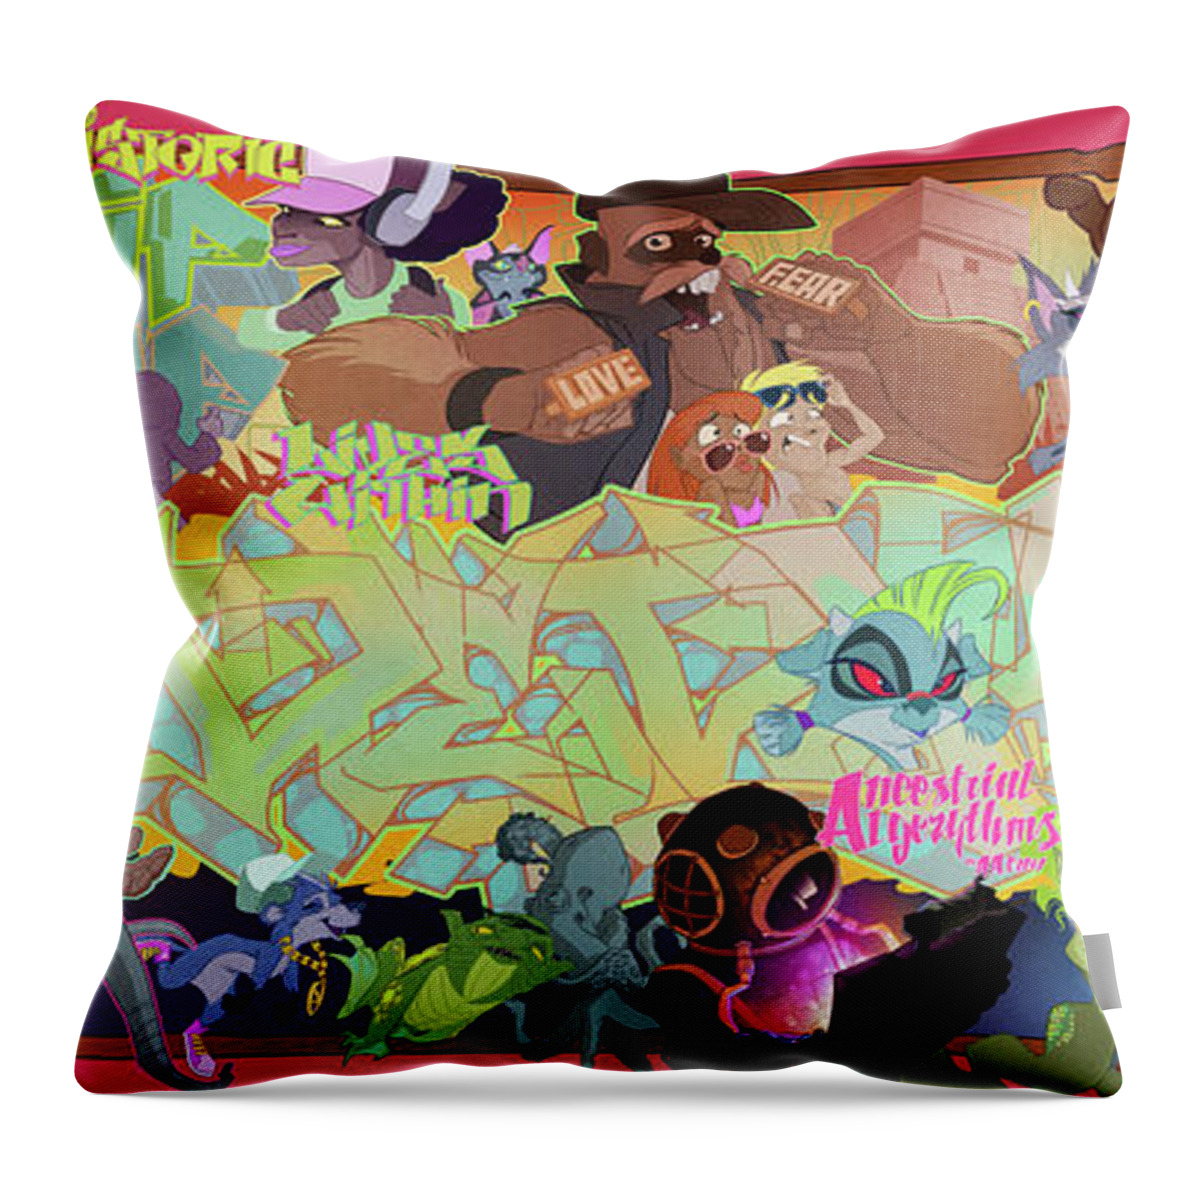 Surf Throw Pillow featuring the digital art Tidal Recall 2 by Nelson Dedos Garcia